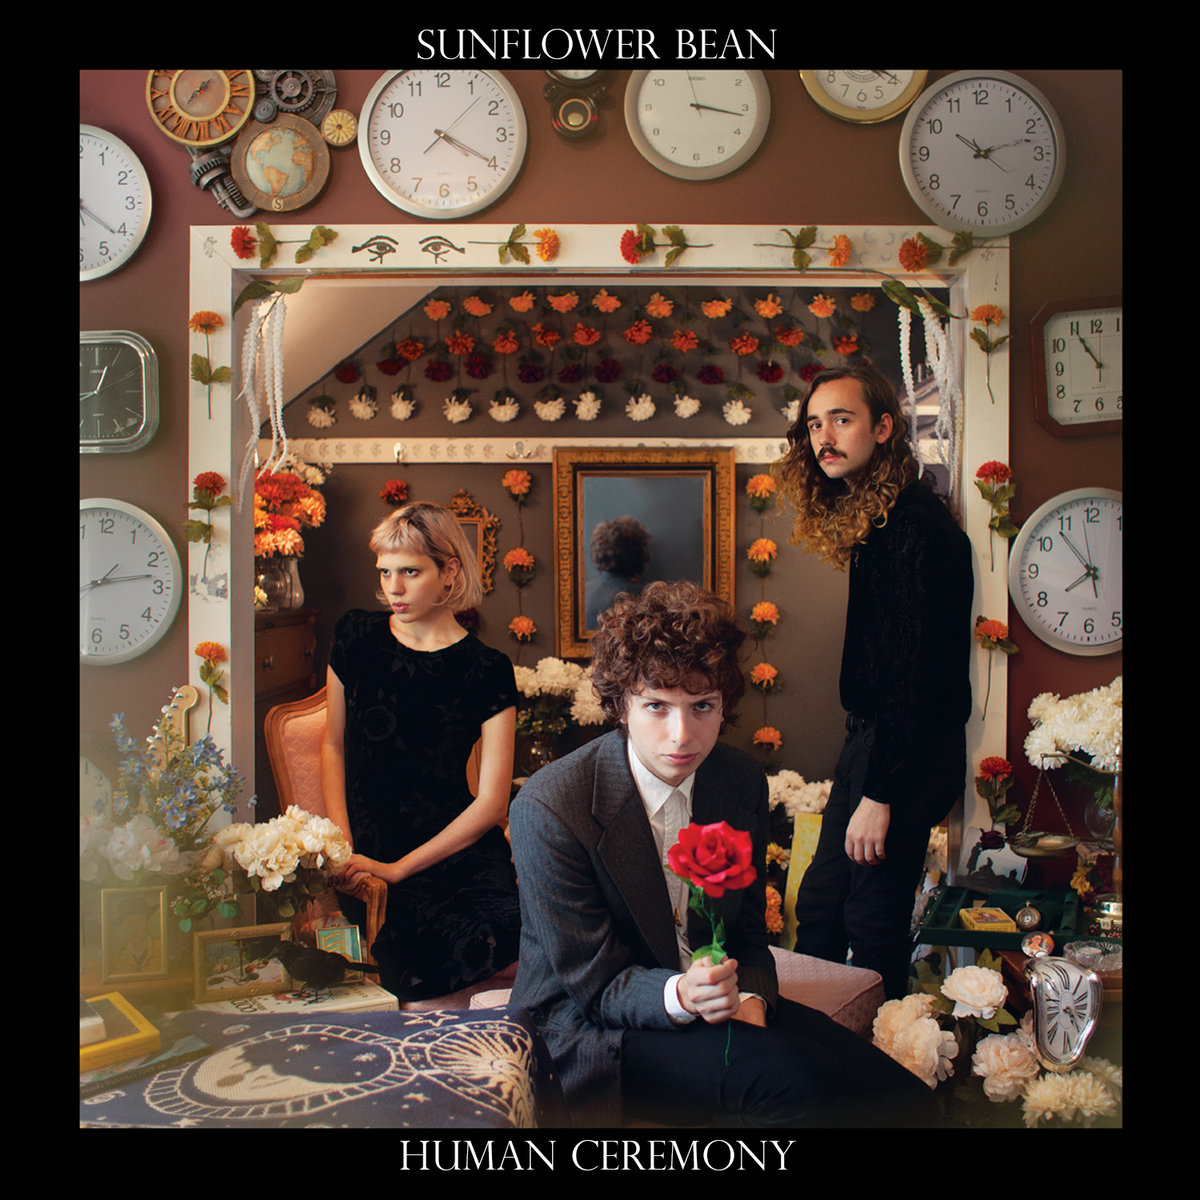 'Human Ceremony' by Sunflower Bean, album review by Allie Volpe.